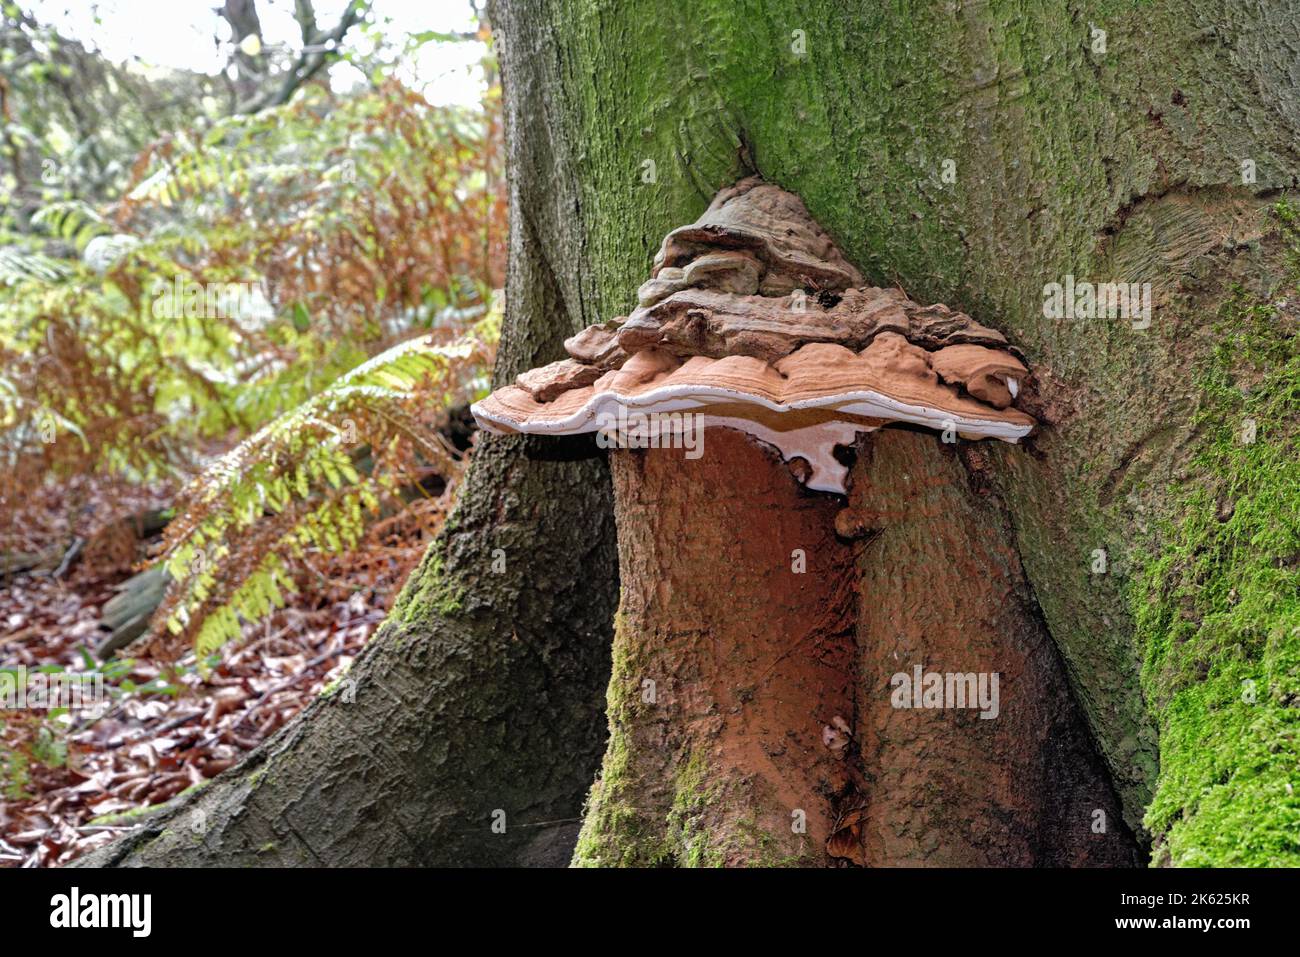 Close up of a large bracket fungus growing on the trunk of a beech tree Stock Photo